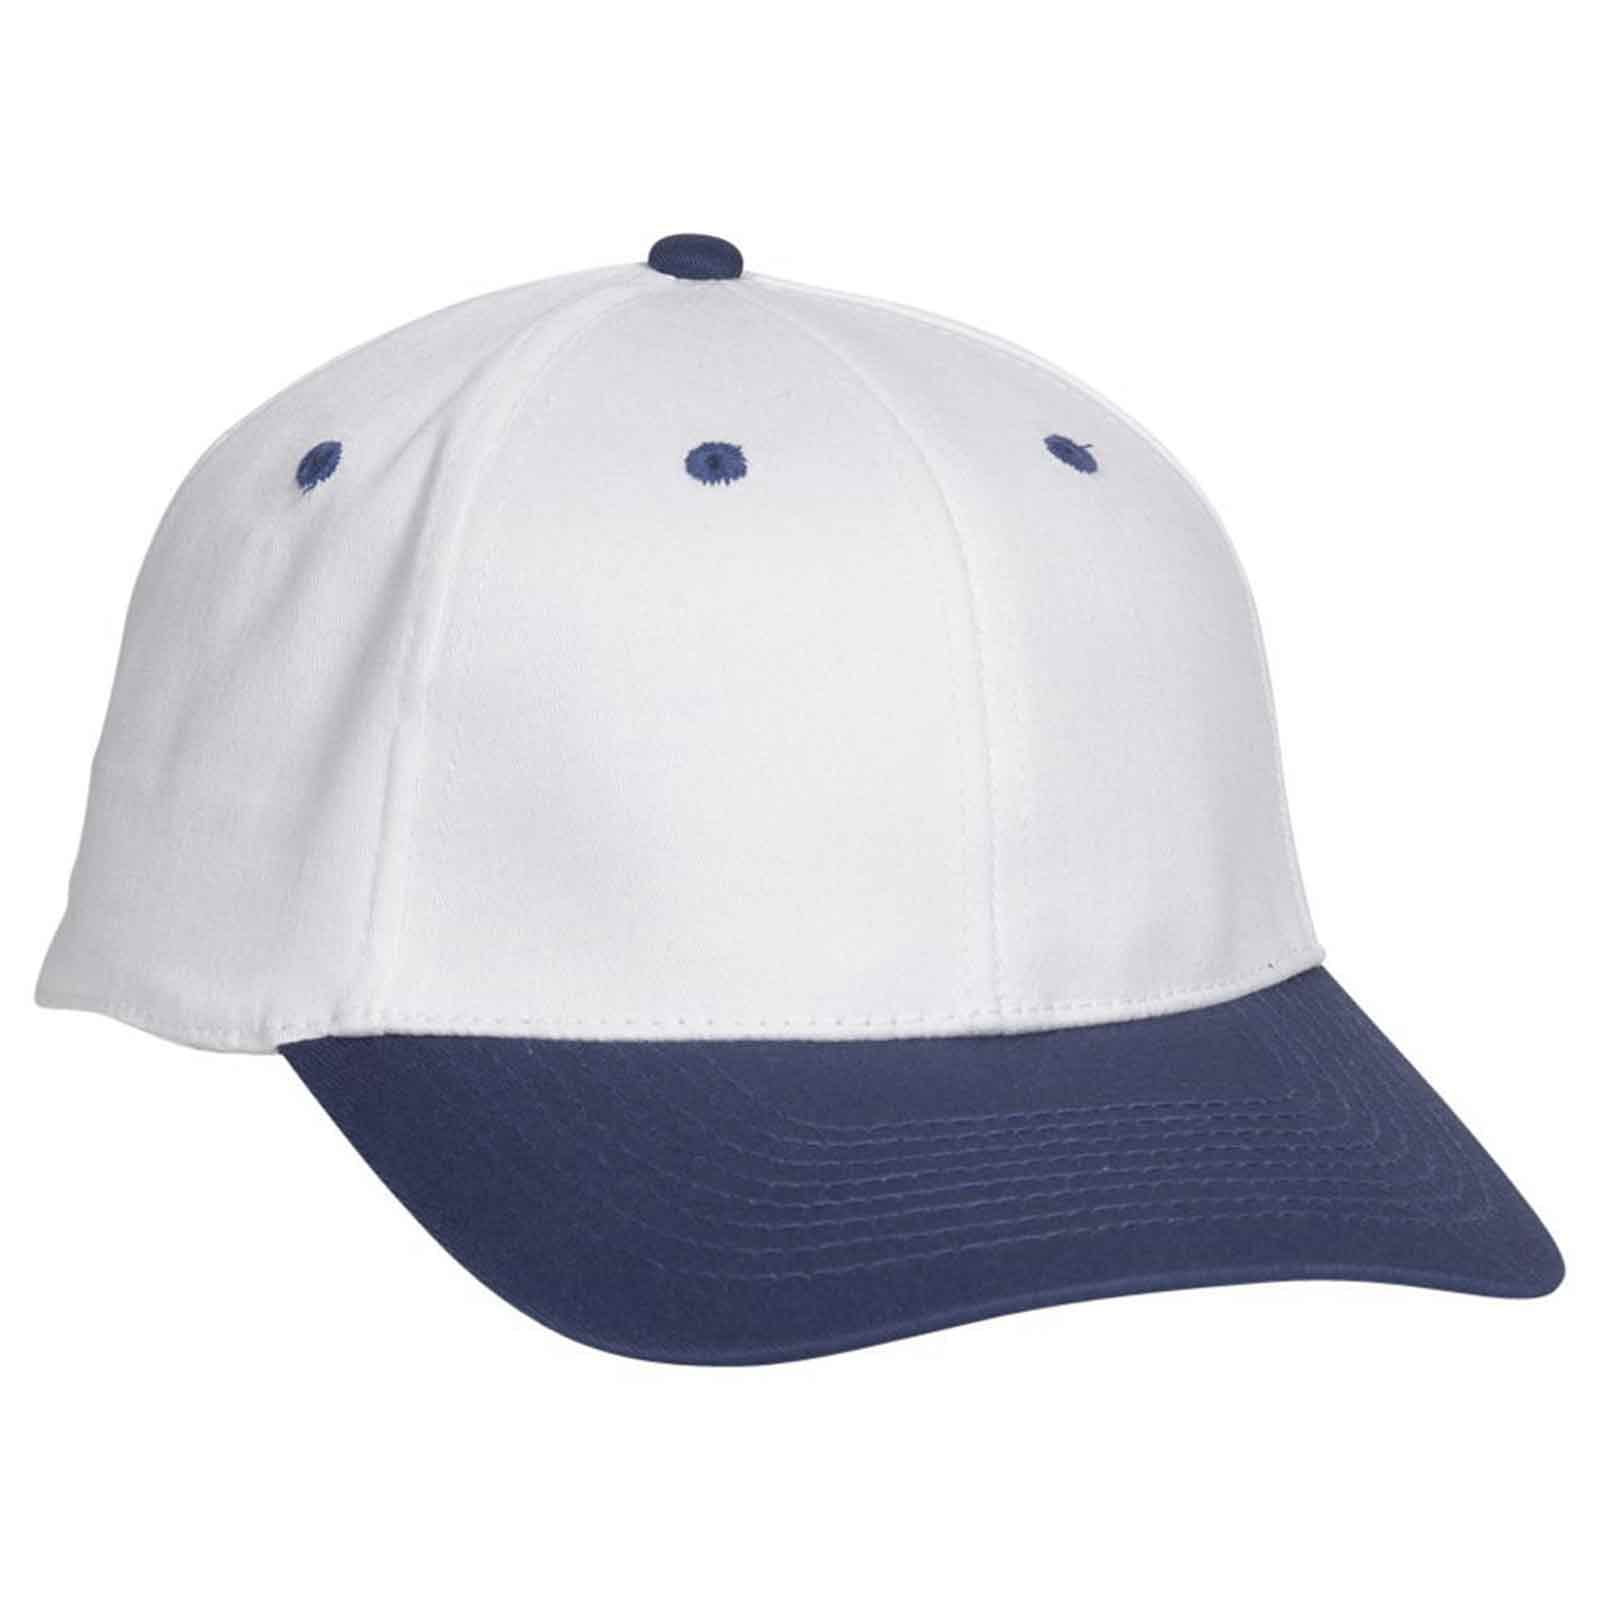 Wholesale Lot 48 Flex Stretch Baseball Caps Hat Fitted 